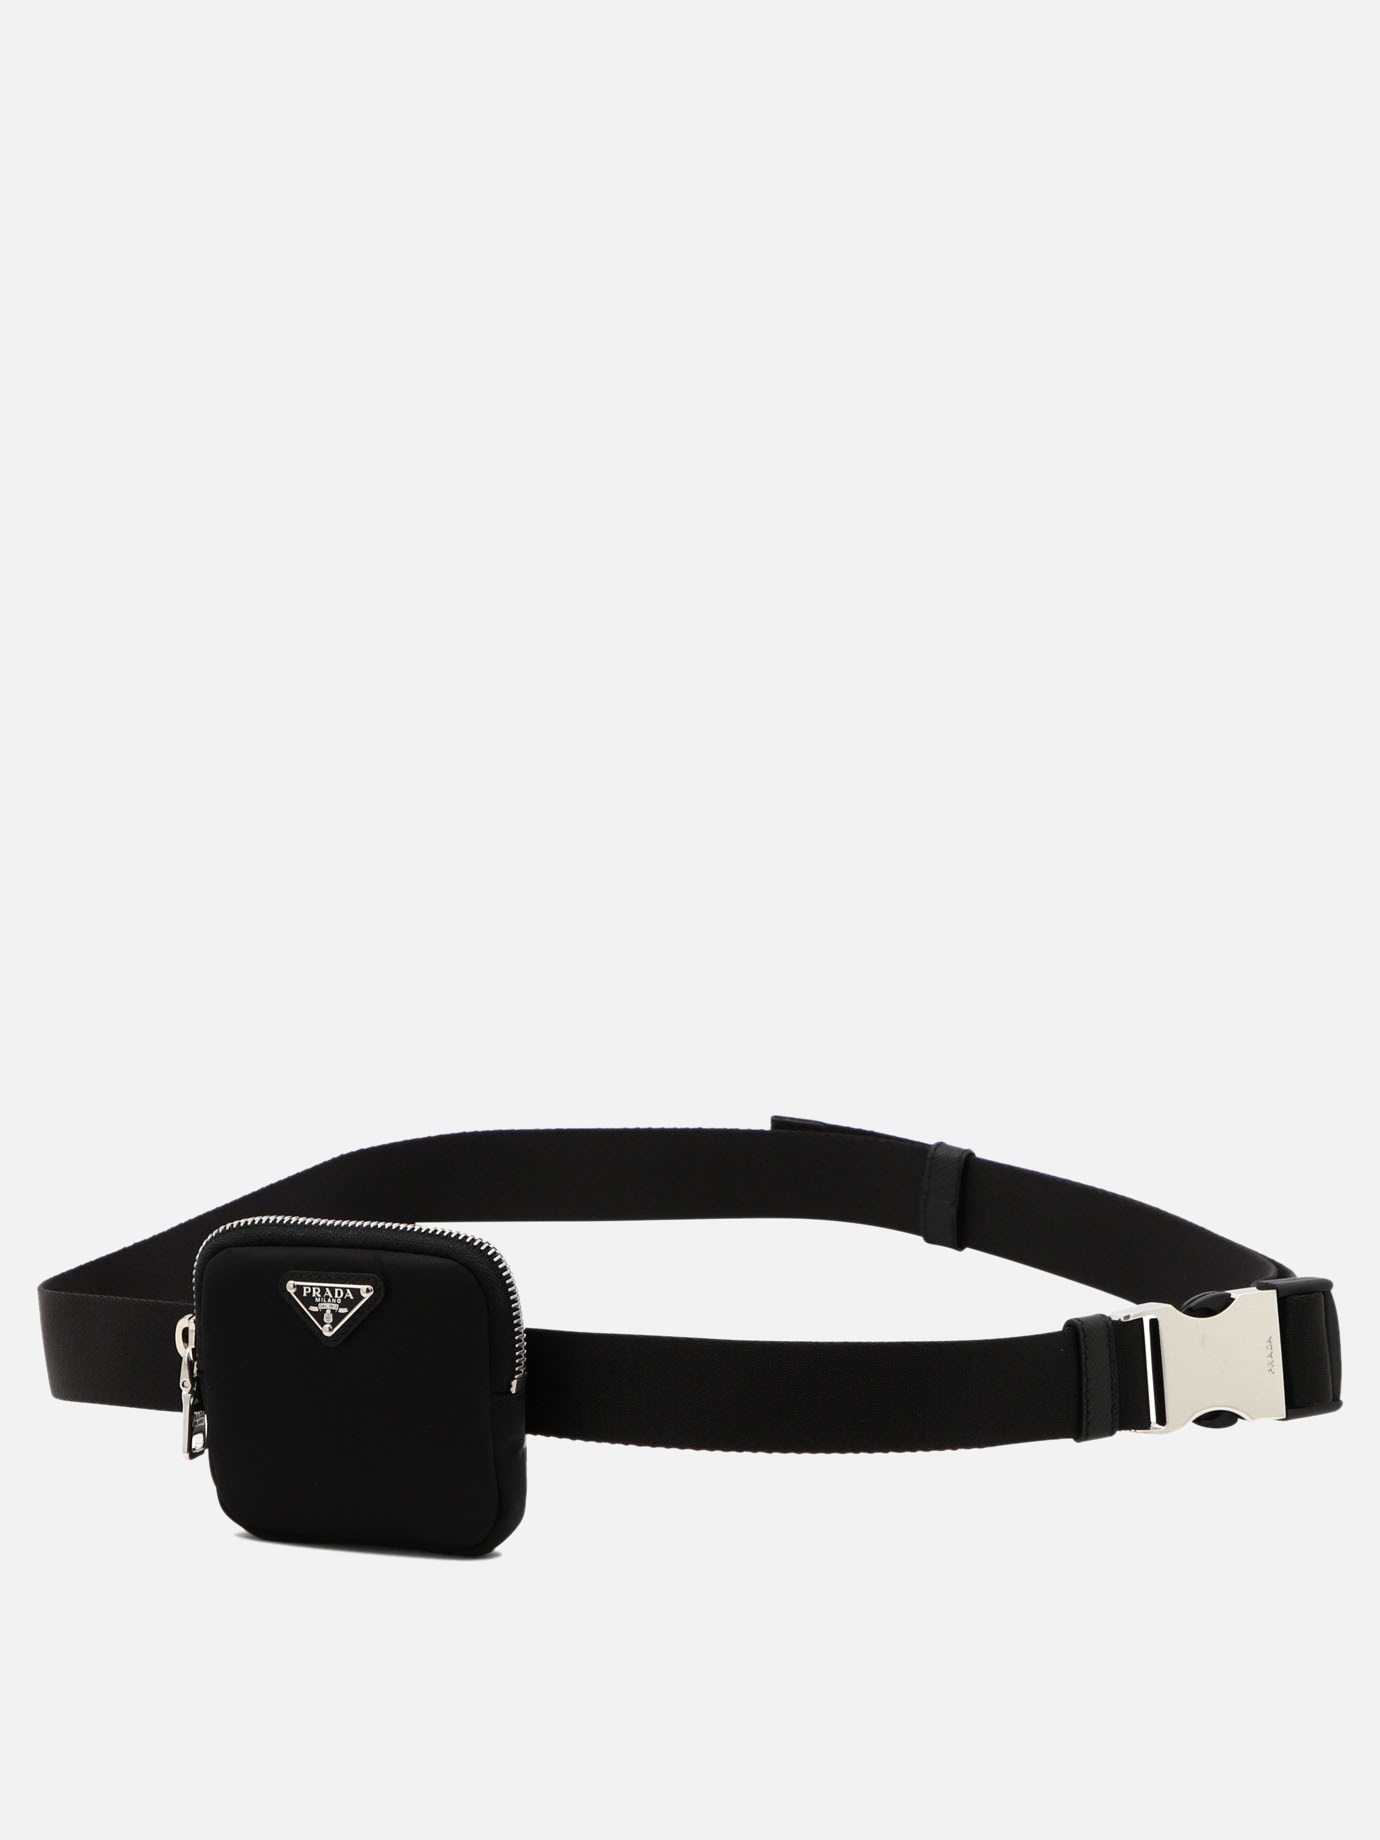 Fabric belt with pouch by Prada